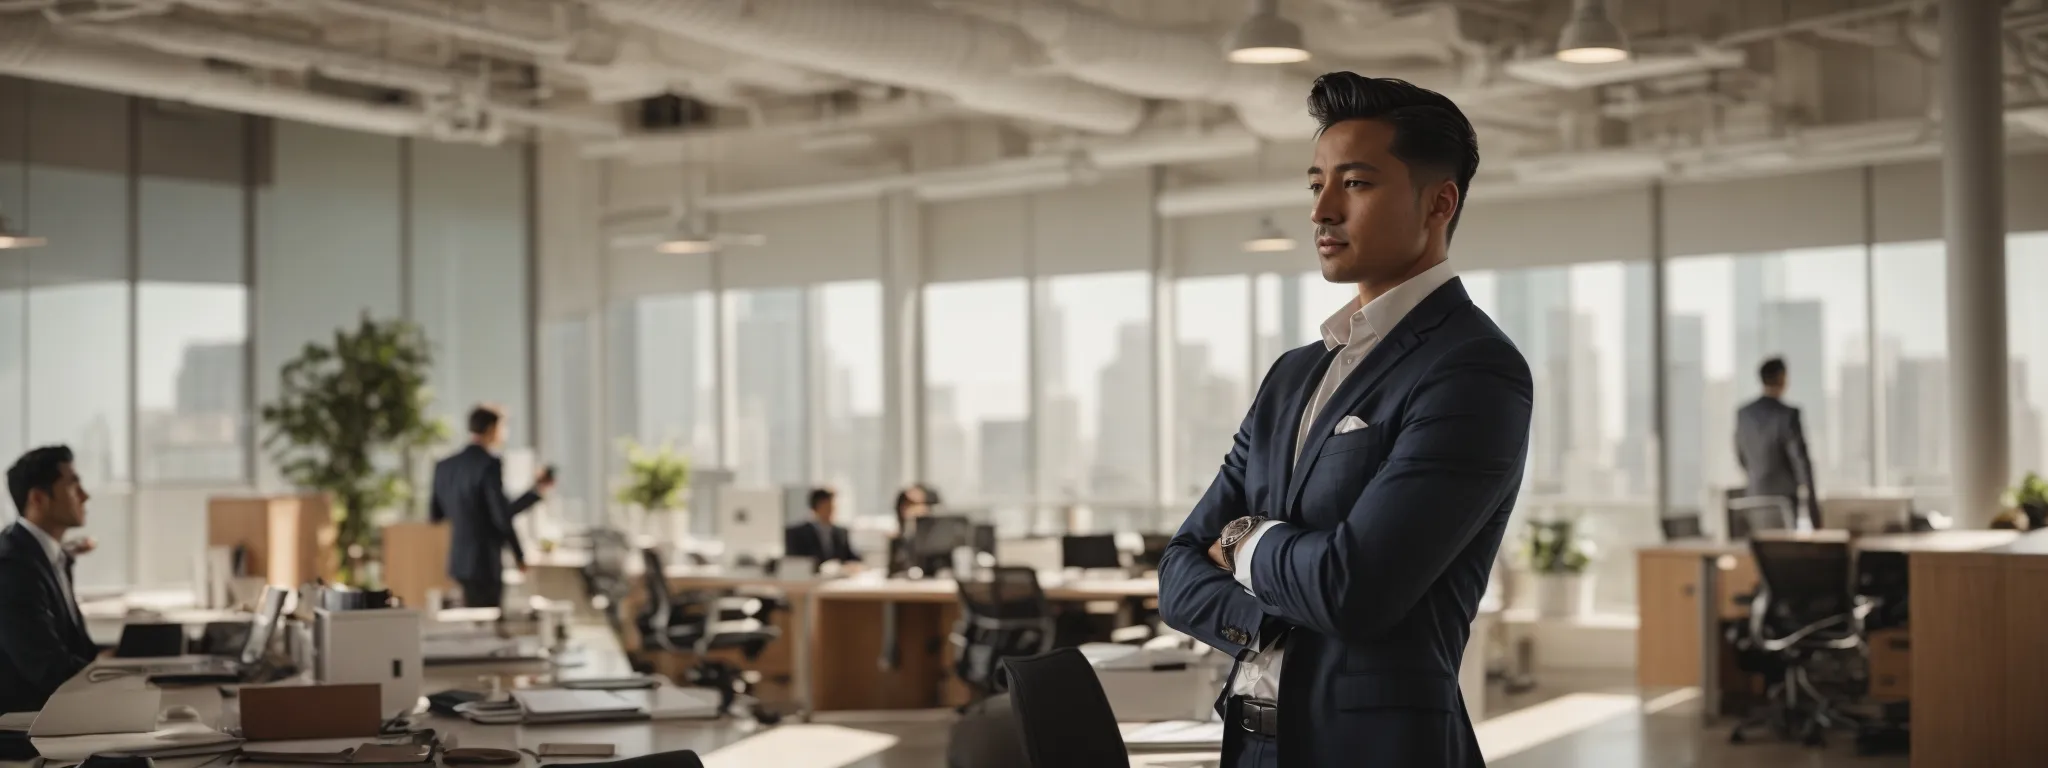 a confident entrepreneur gazes across a modern, sunlit office space where creative team members collaborate over a digital marketing strategy.